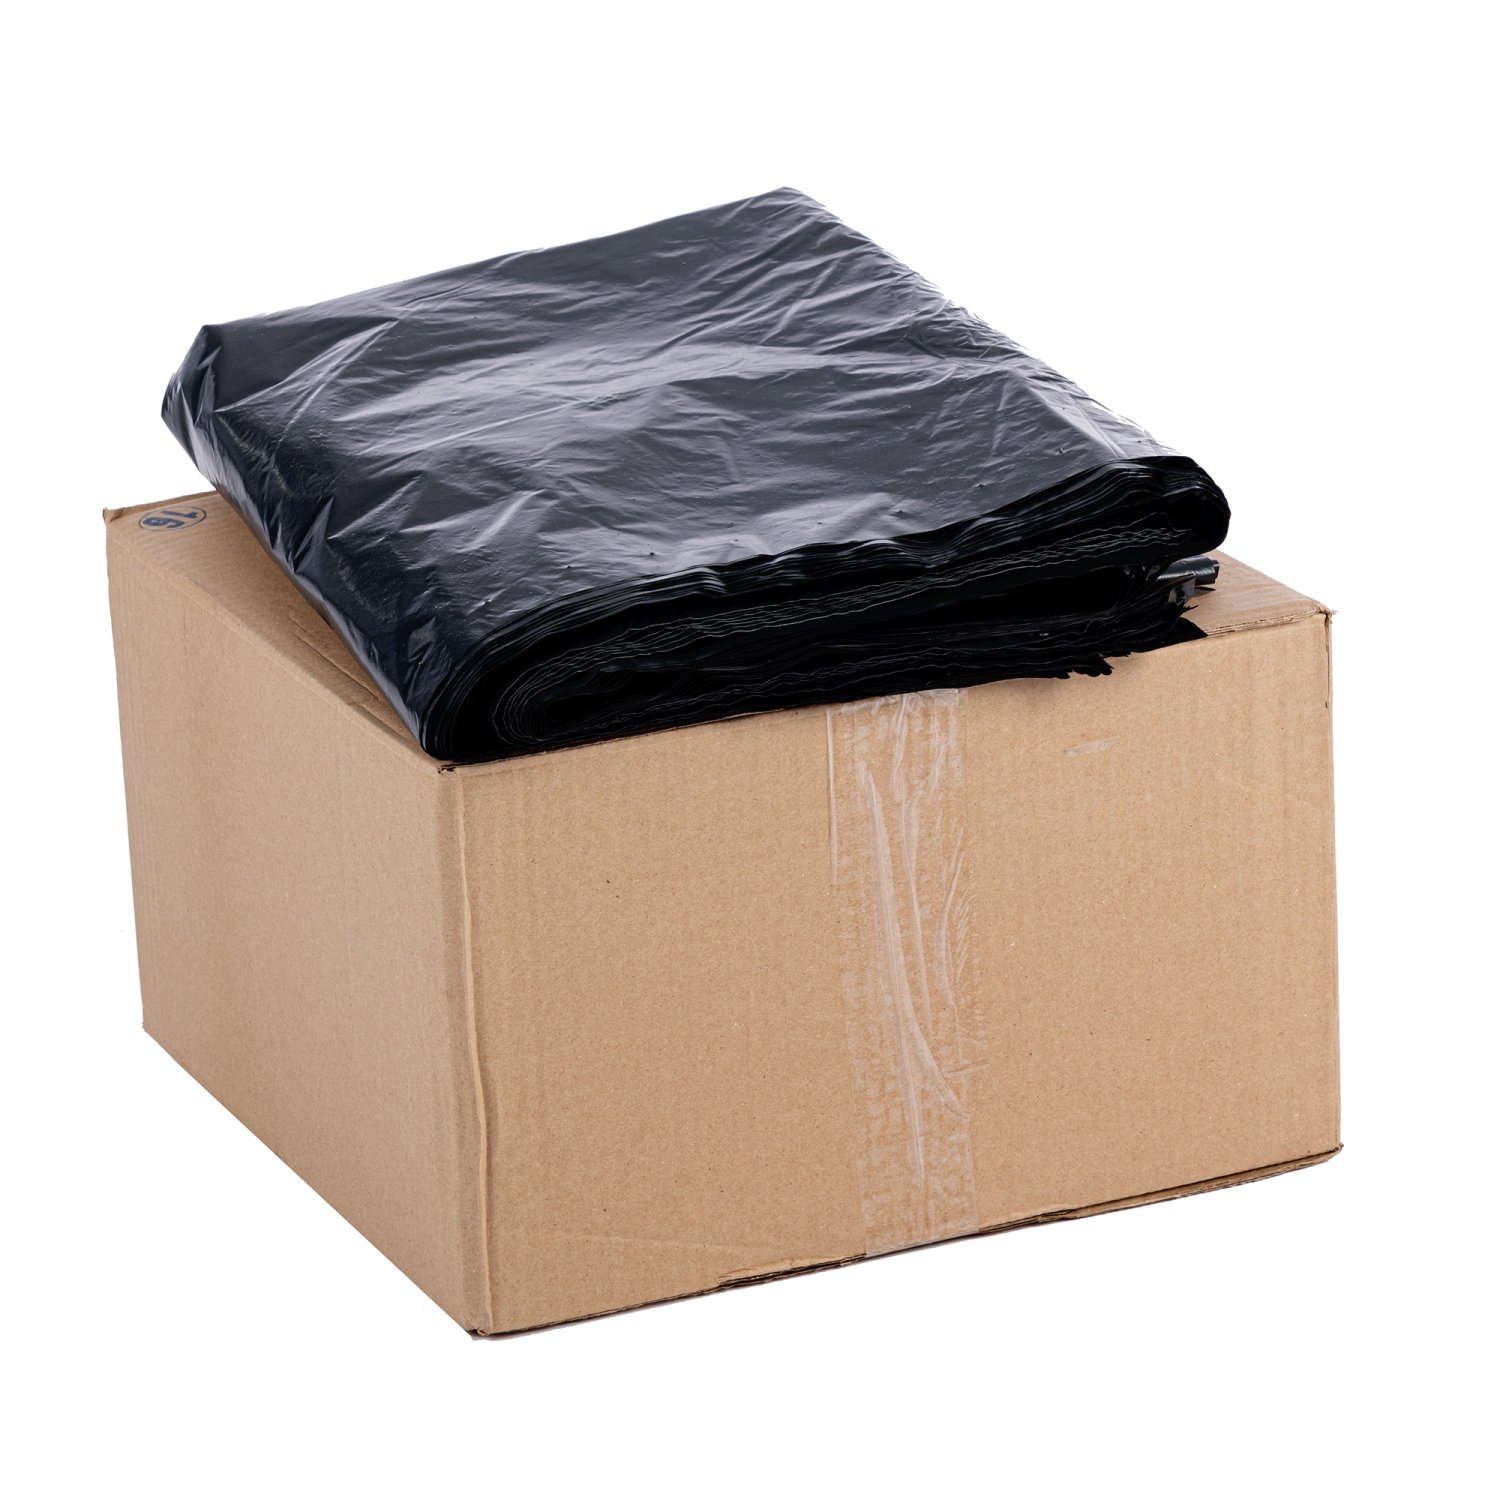 Palletbox bag 670 l, LDPE recyclate, 45 mu, black bag, no print, unperforated, without closing ribbon